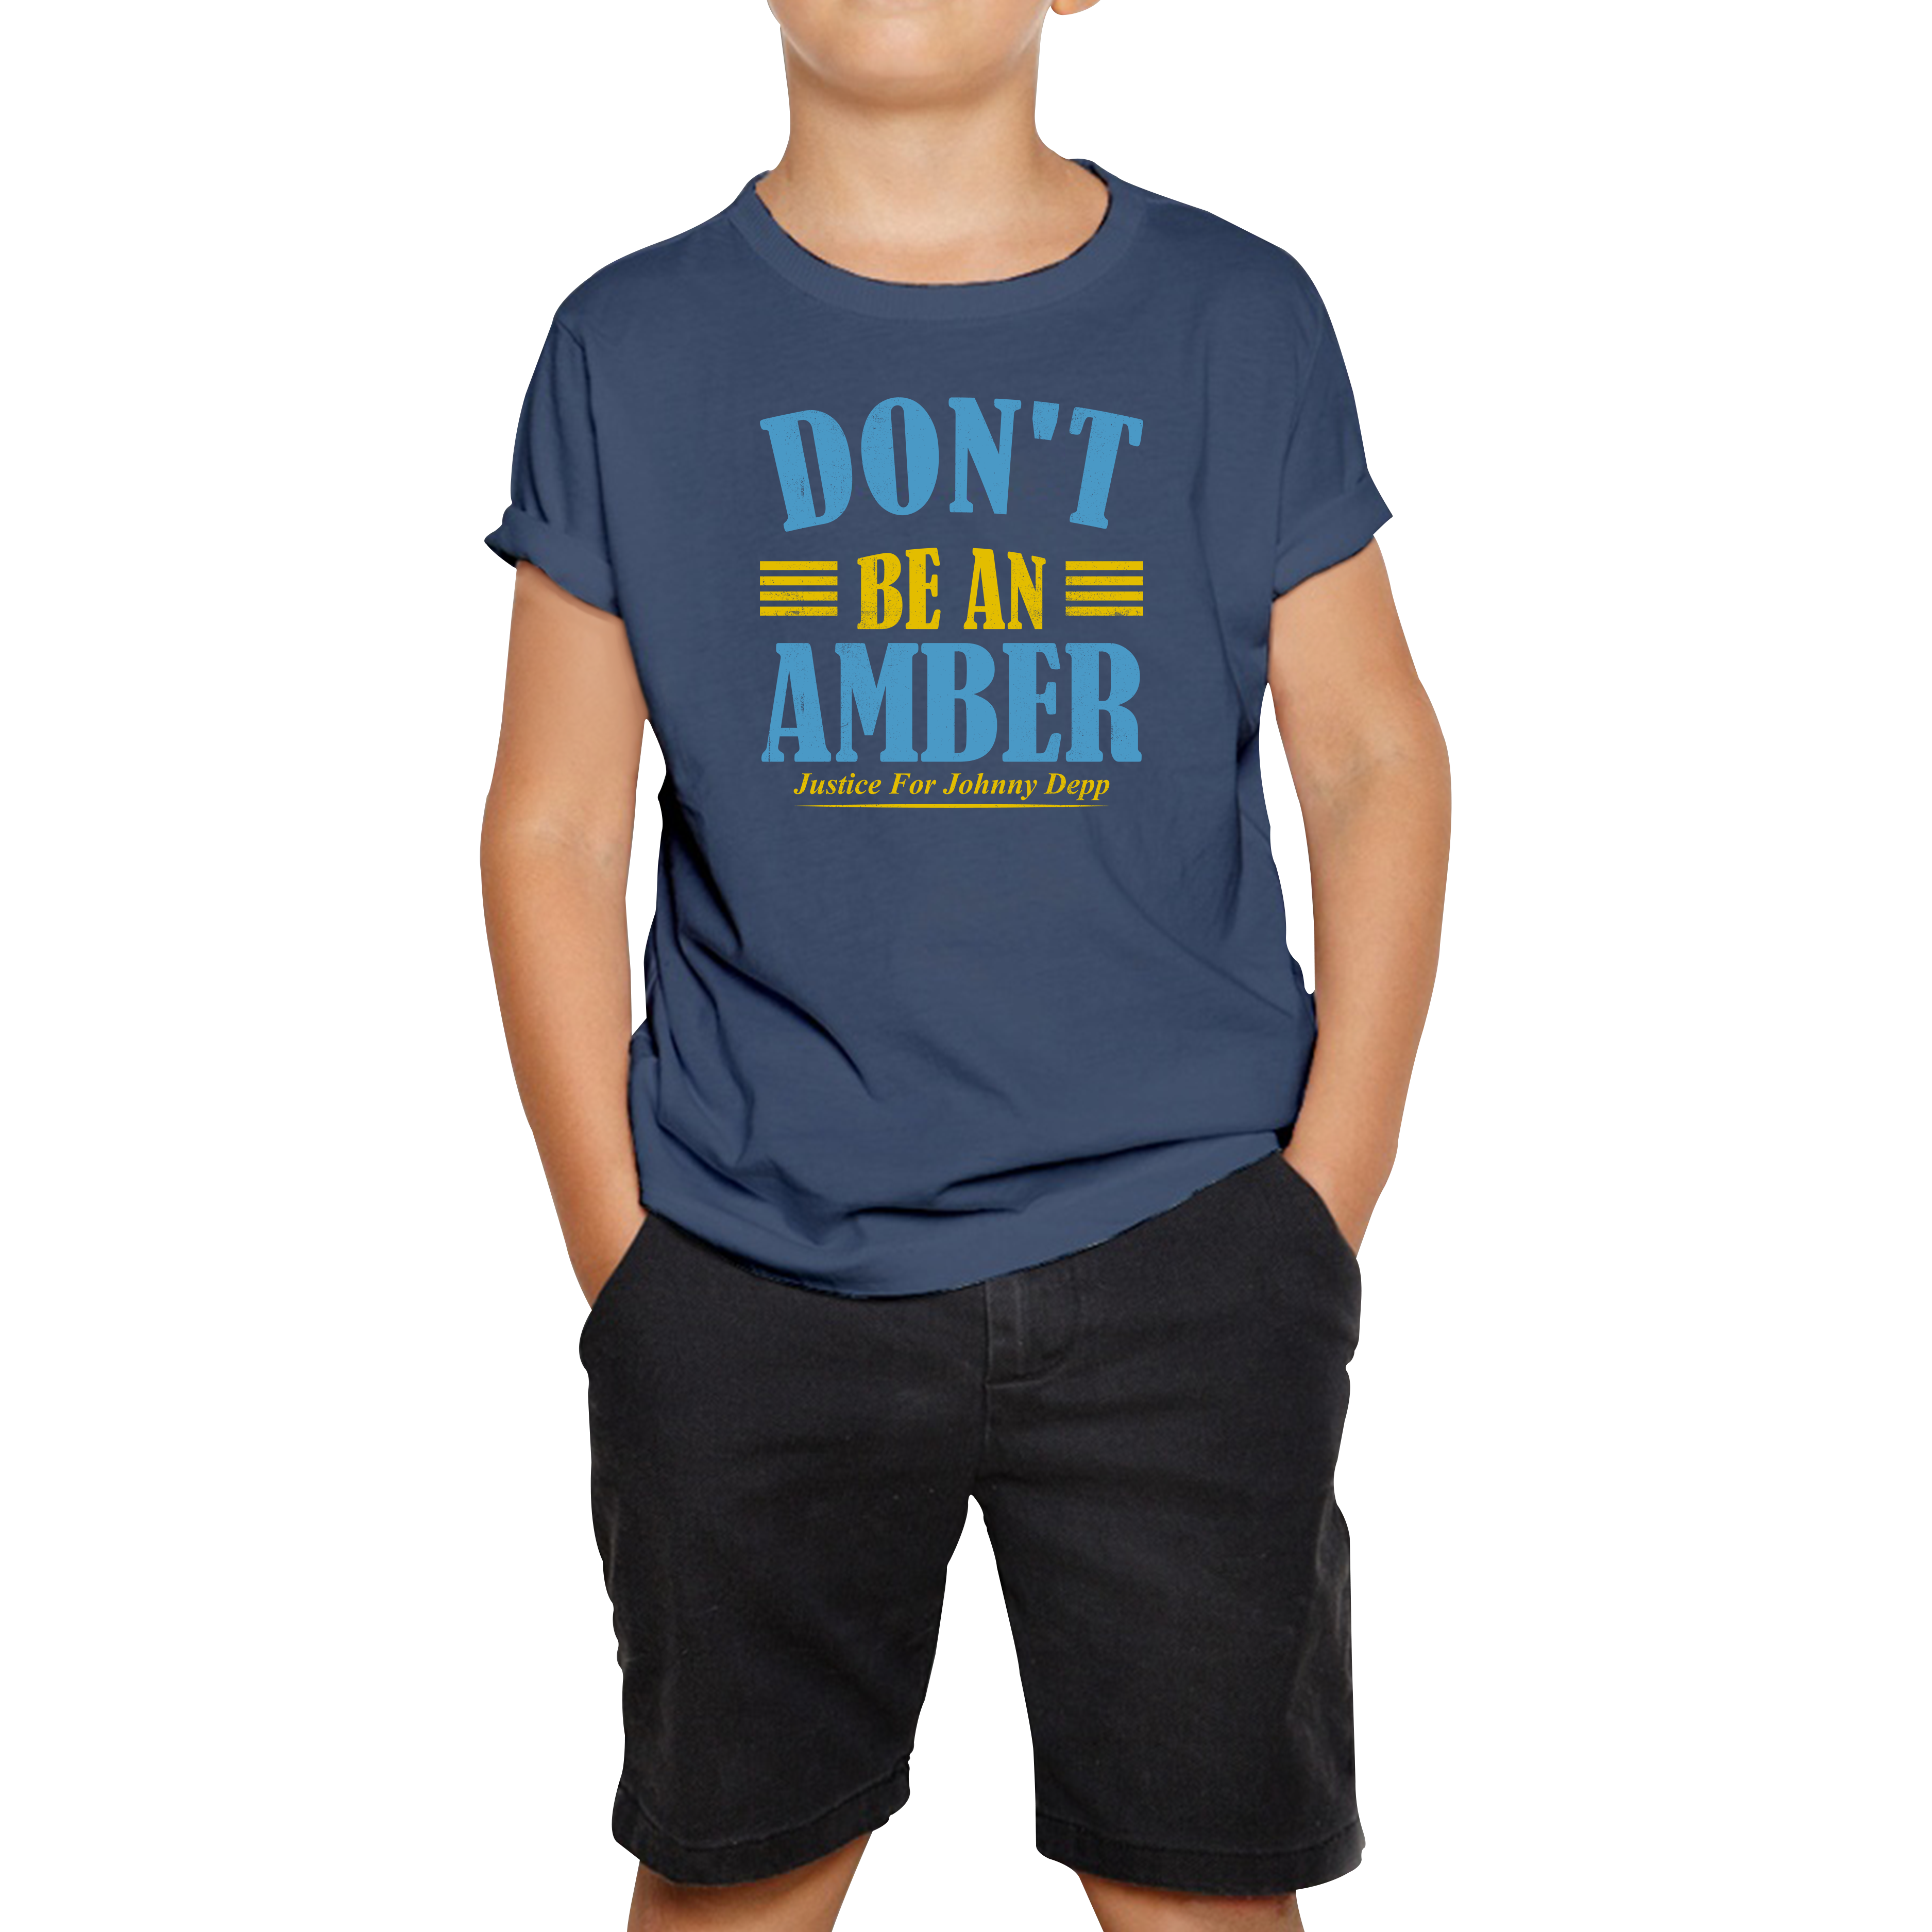 Don't Be An Amber Justice For Johnny Depp T-Shirt Stand With Johnny Depp Kids Tee